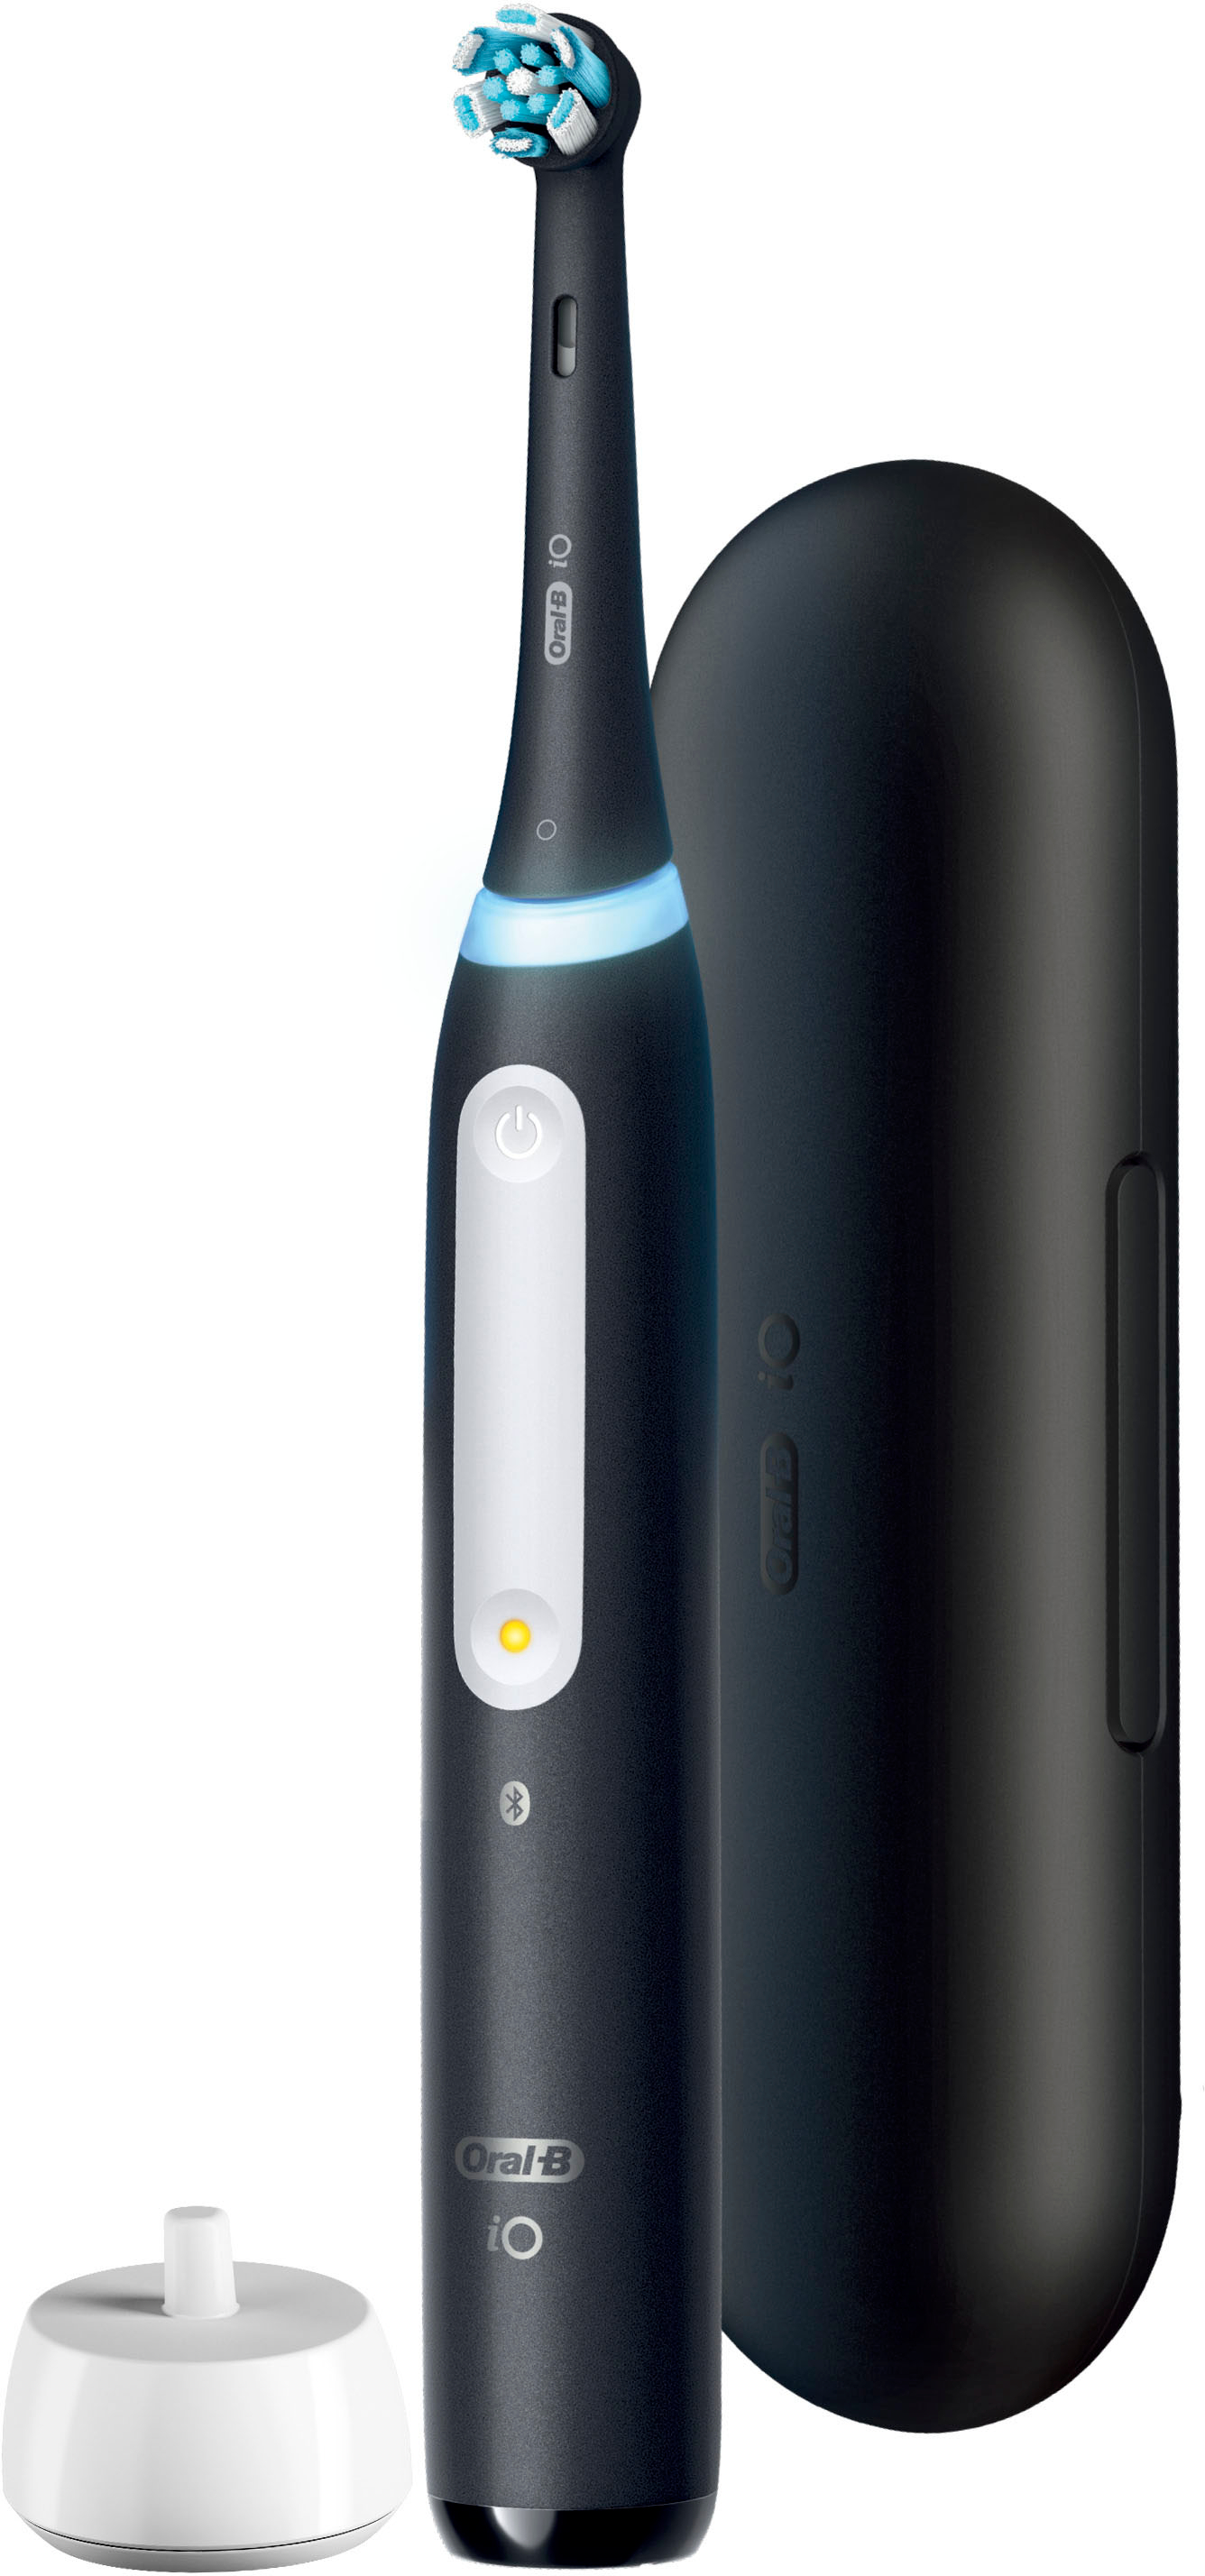 Oral-B - iO Series 4 Rechargeable Electric Toothbrush Black w/Brush Head - Black